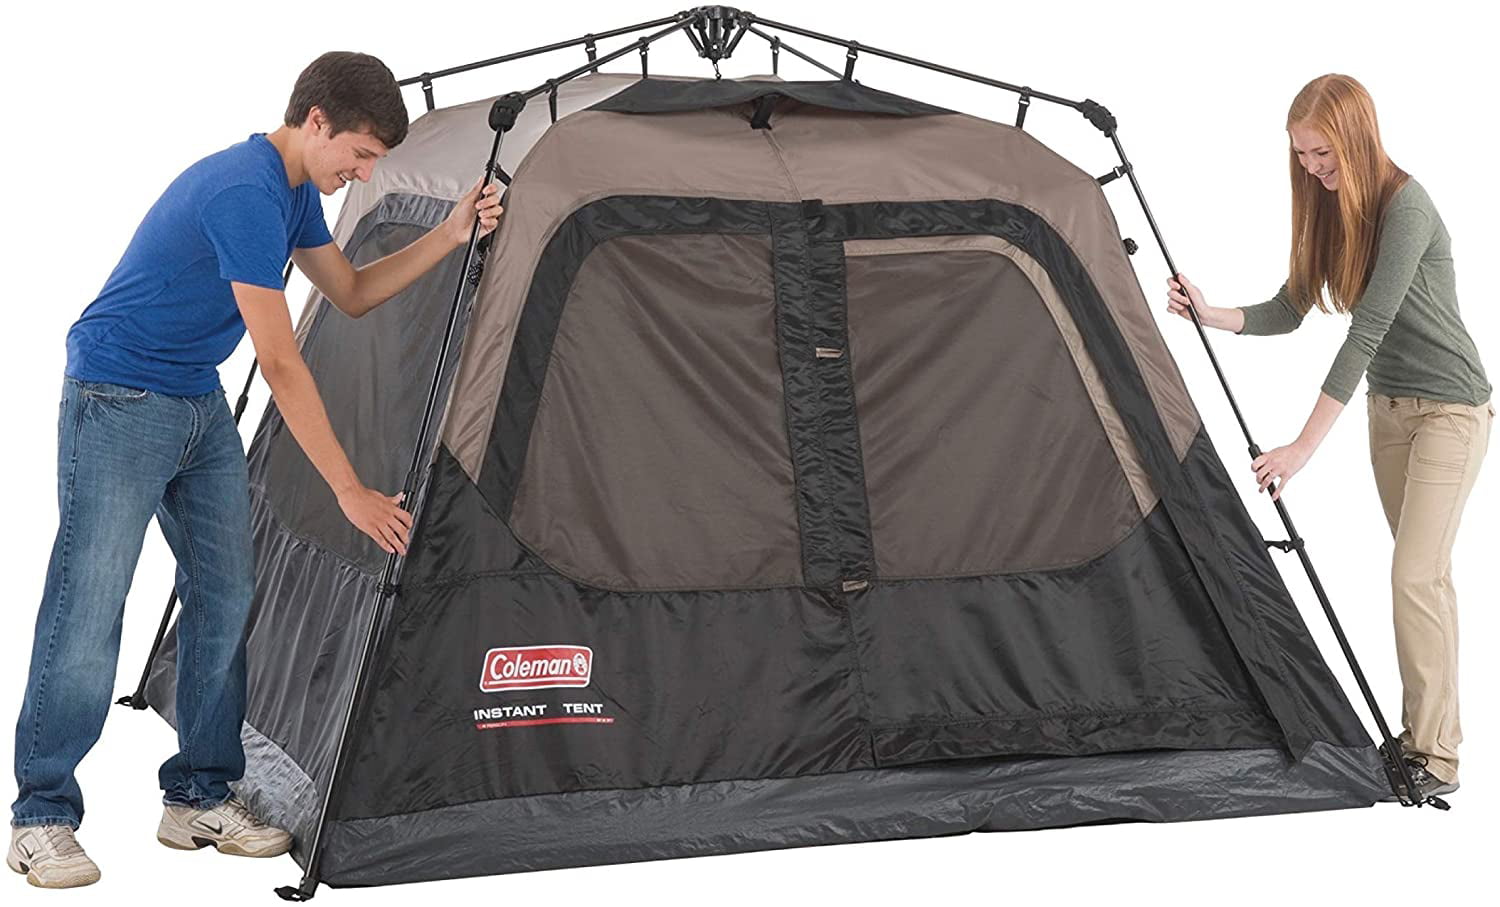 Coleman Cabin Tent With Instant Setup Cabin Tent For Camping Sets Up In 60 Sec